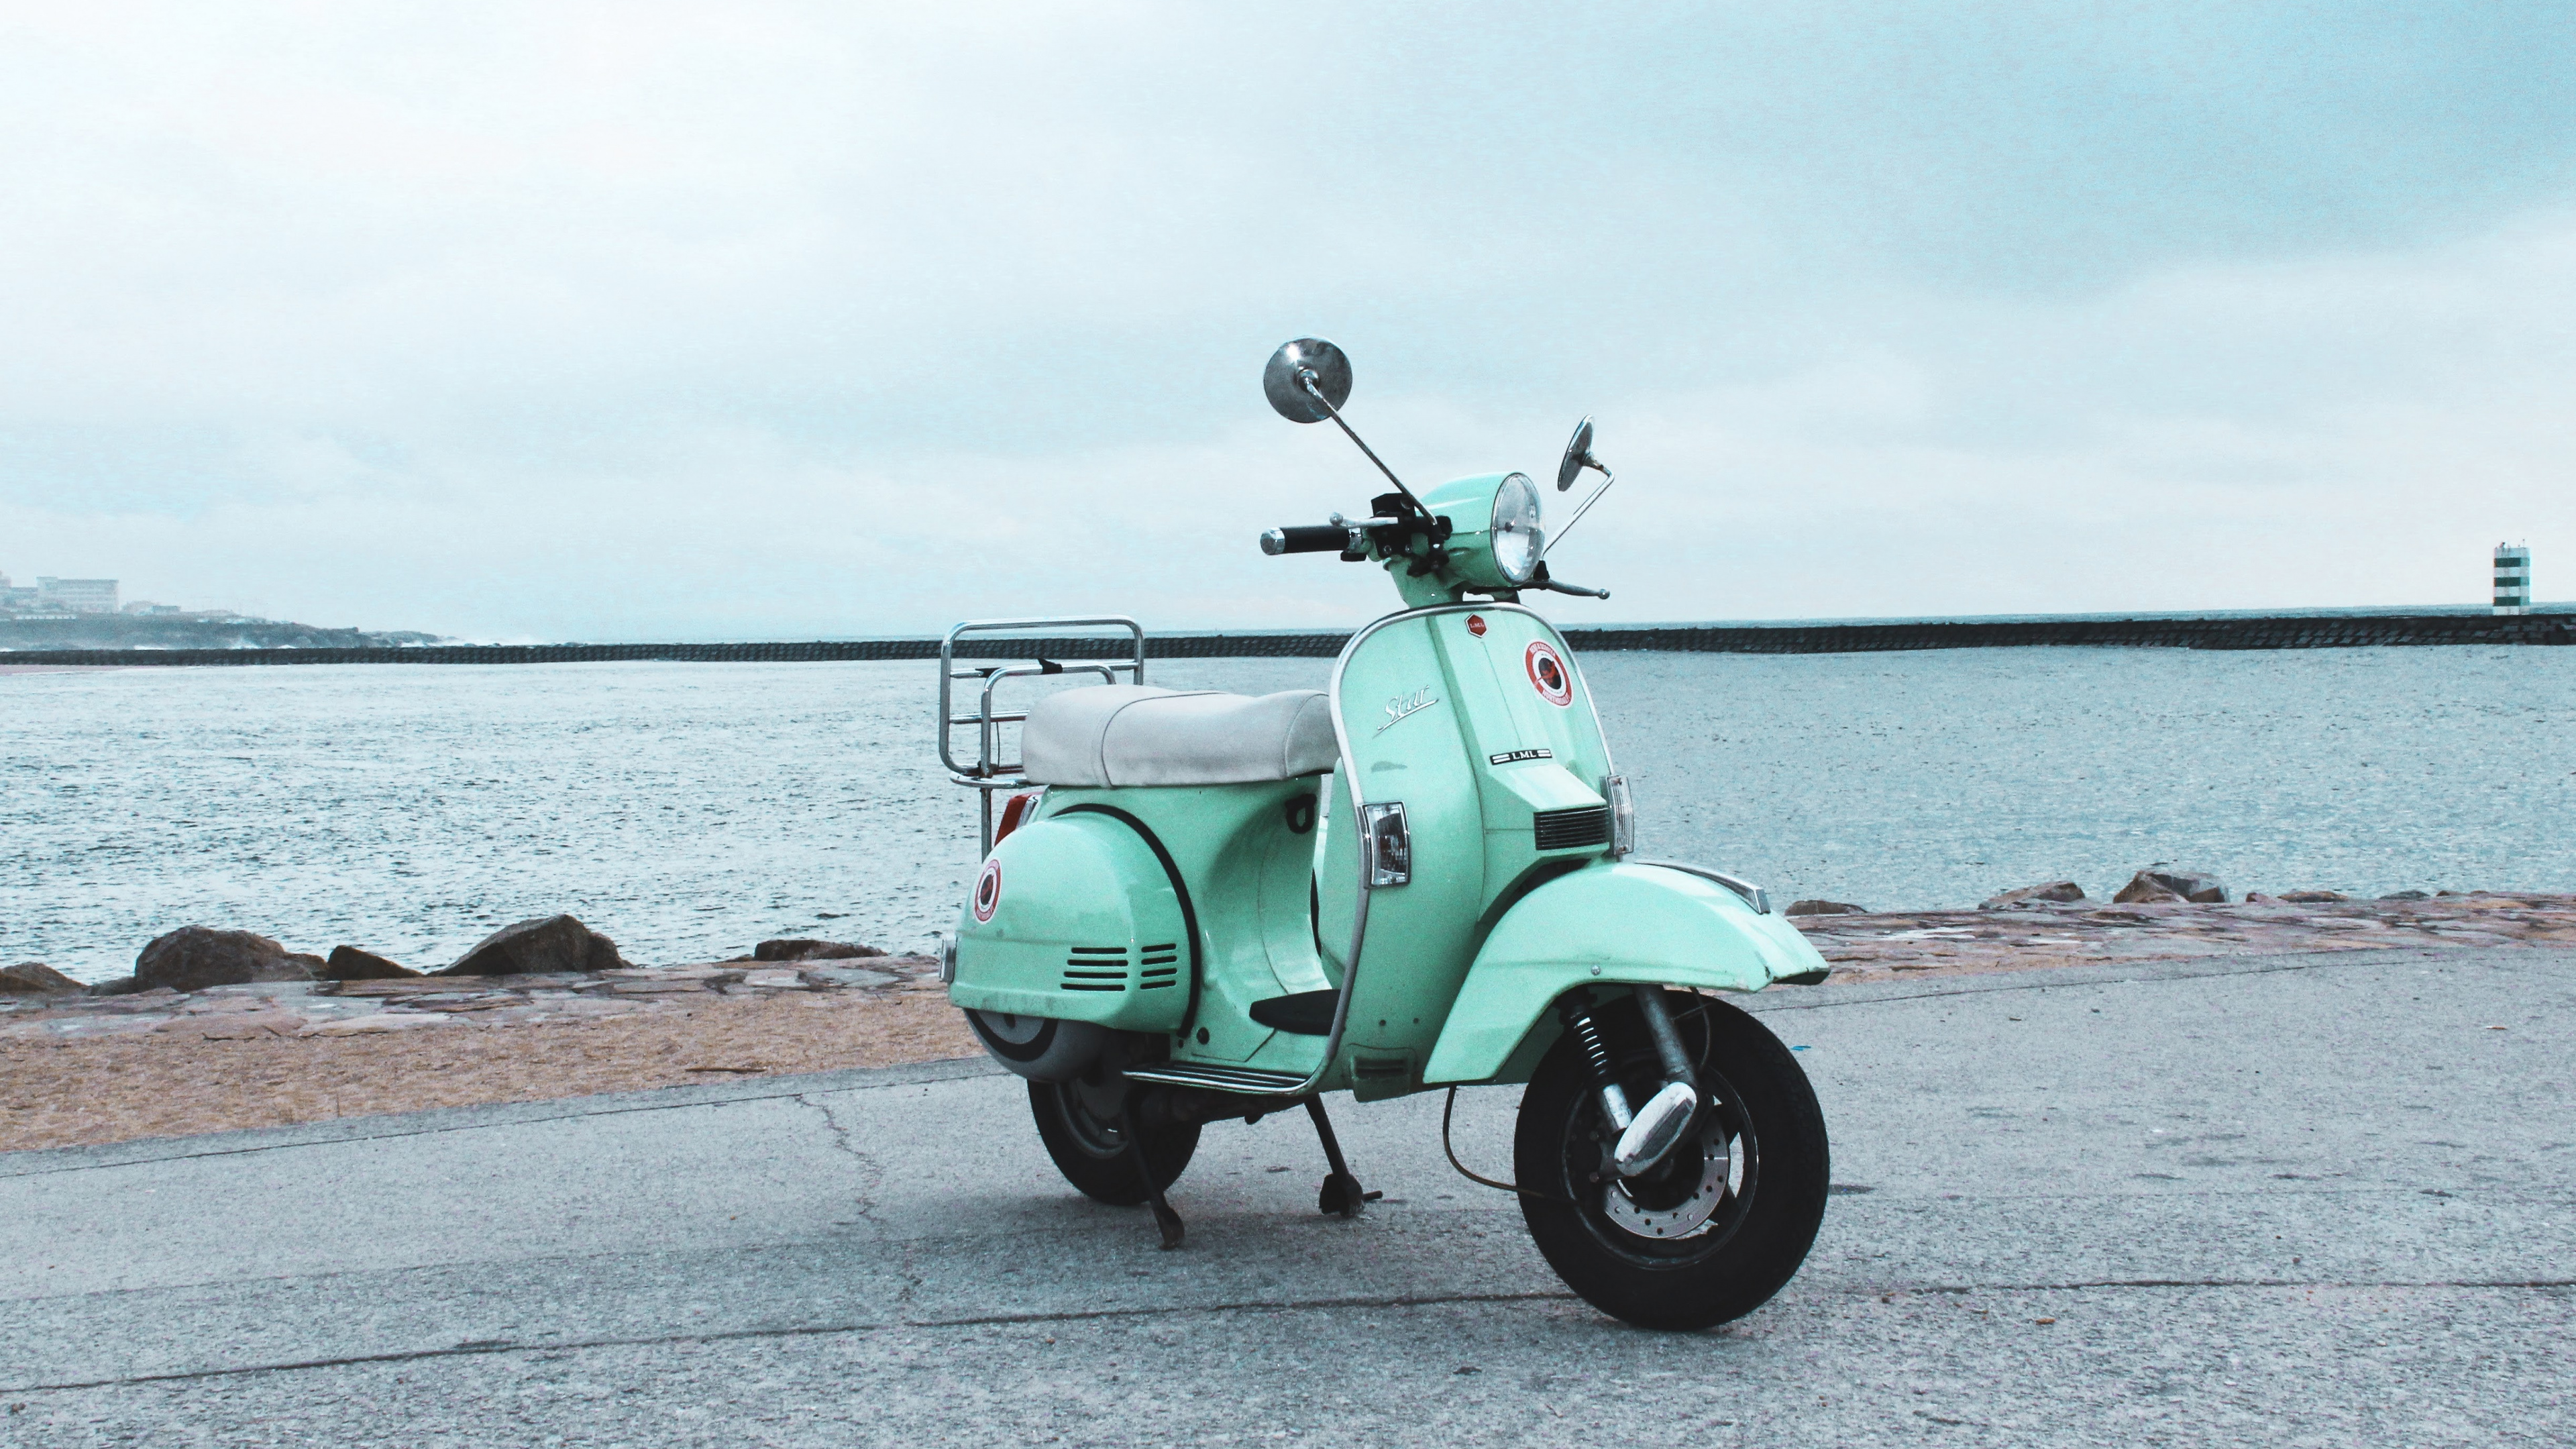 Green Motor Scooter Parked on Gray Concrete Pavement Near Body of Water During Daytime. Wallpaper in 3840x2160 Resolution